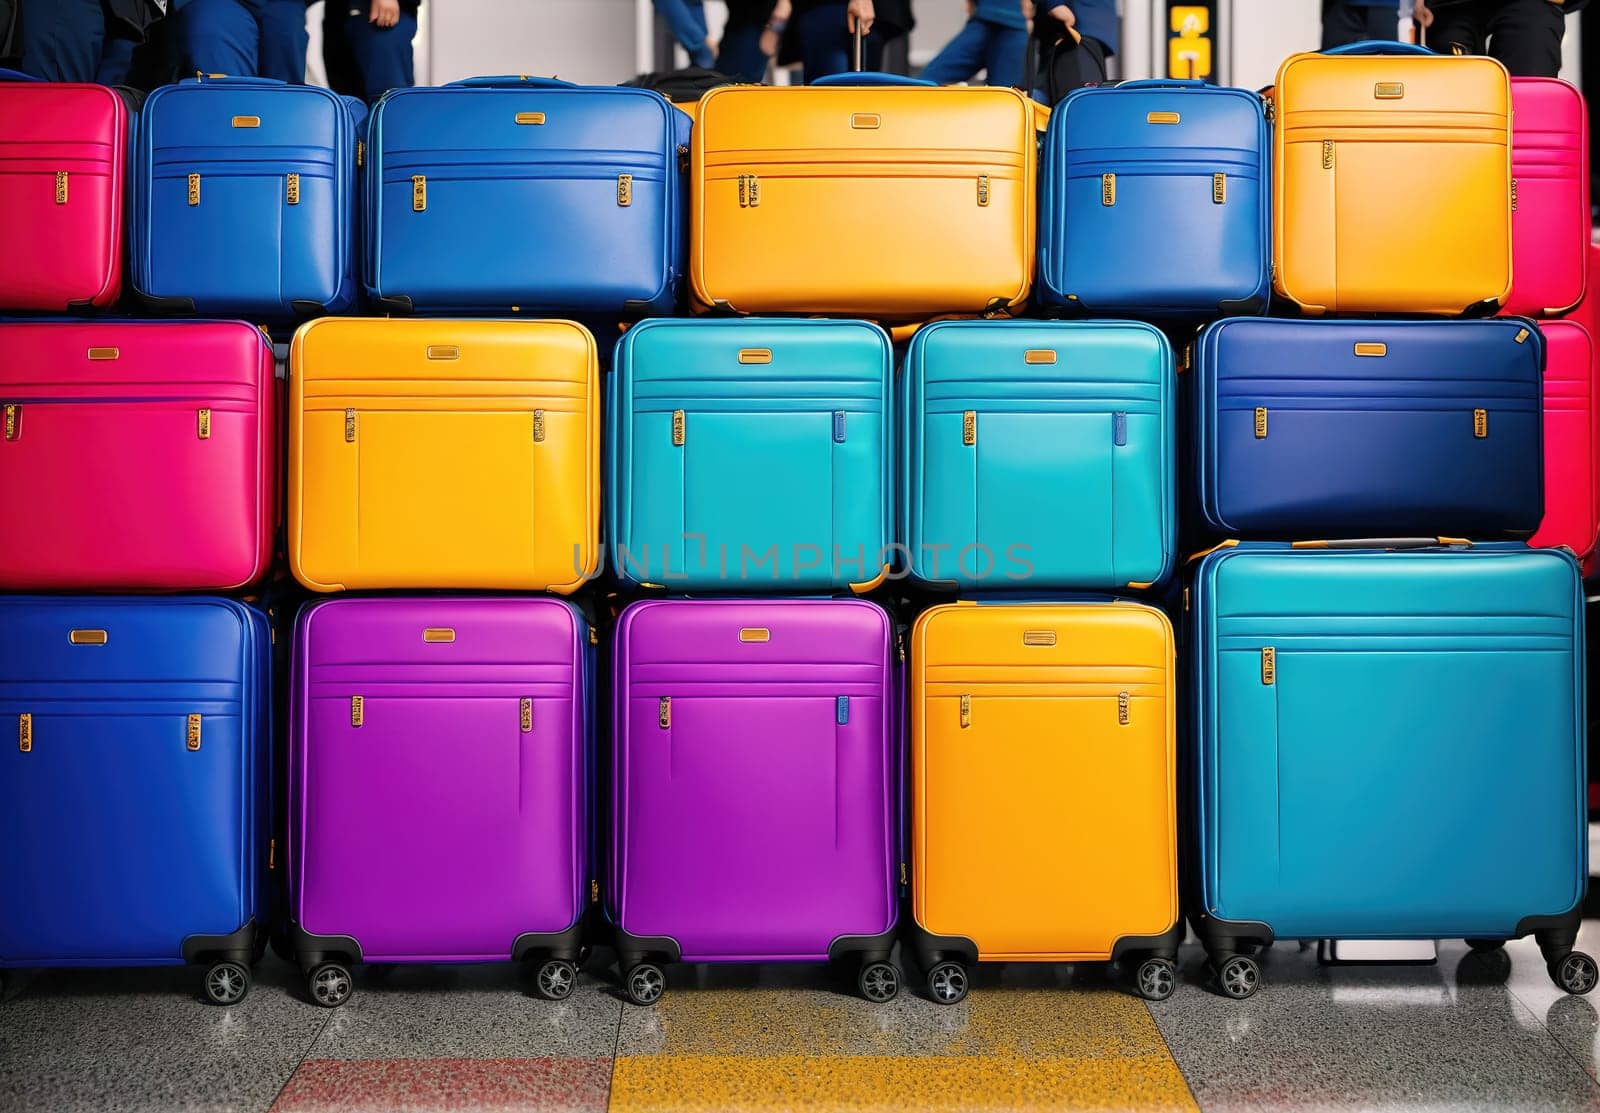 The image shows a group of colorful suitcases stacked up against a wall in an airport terminal.